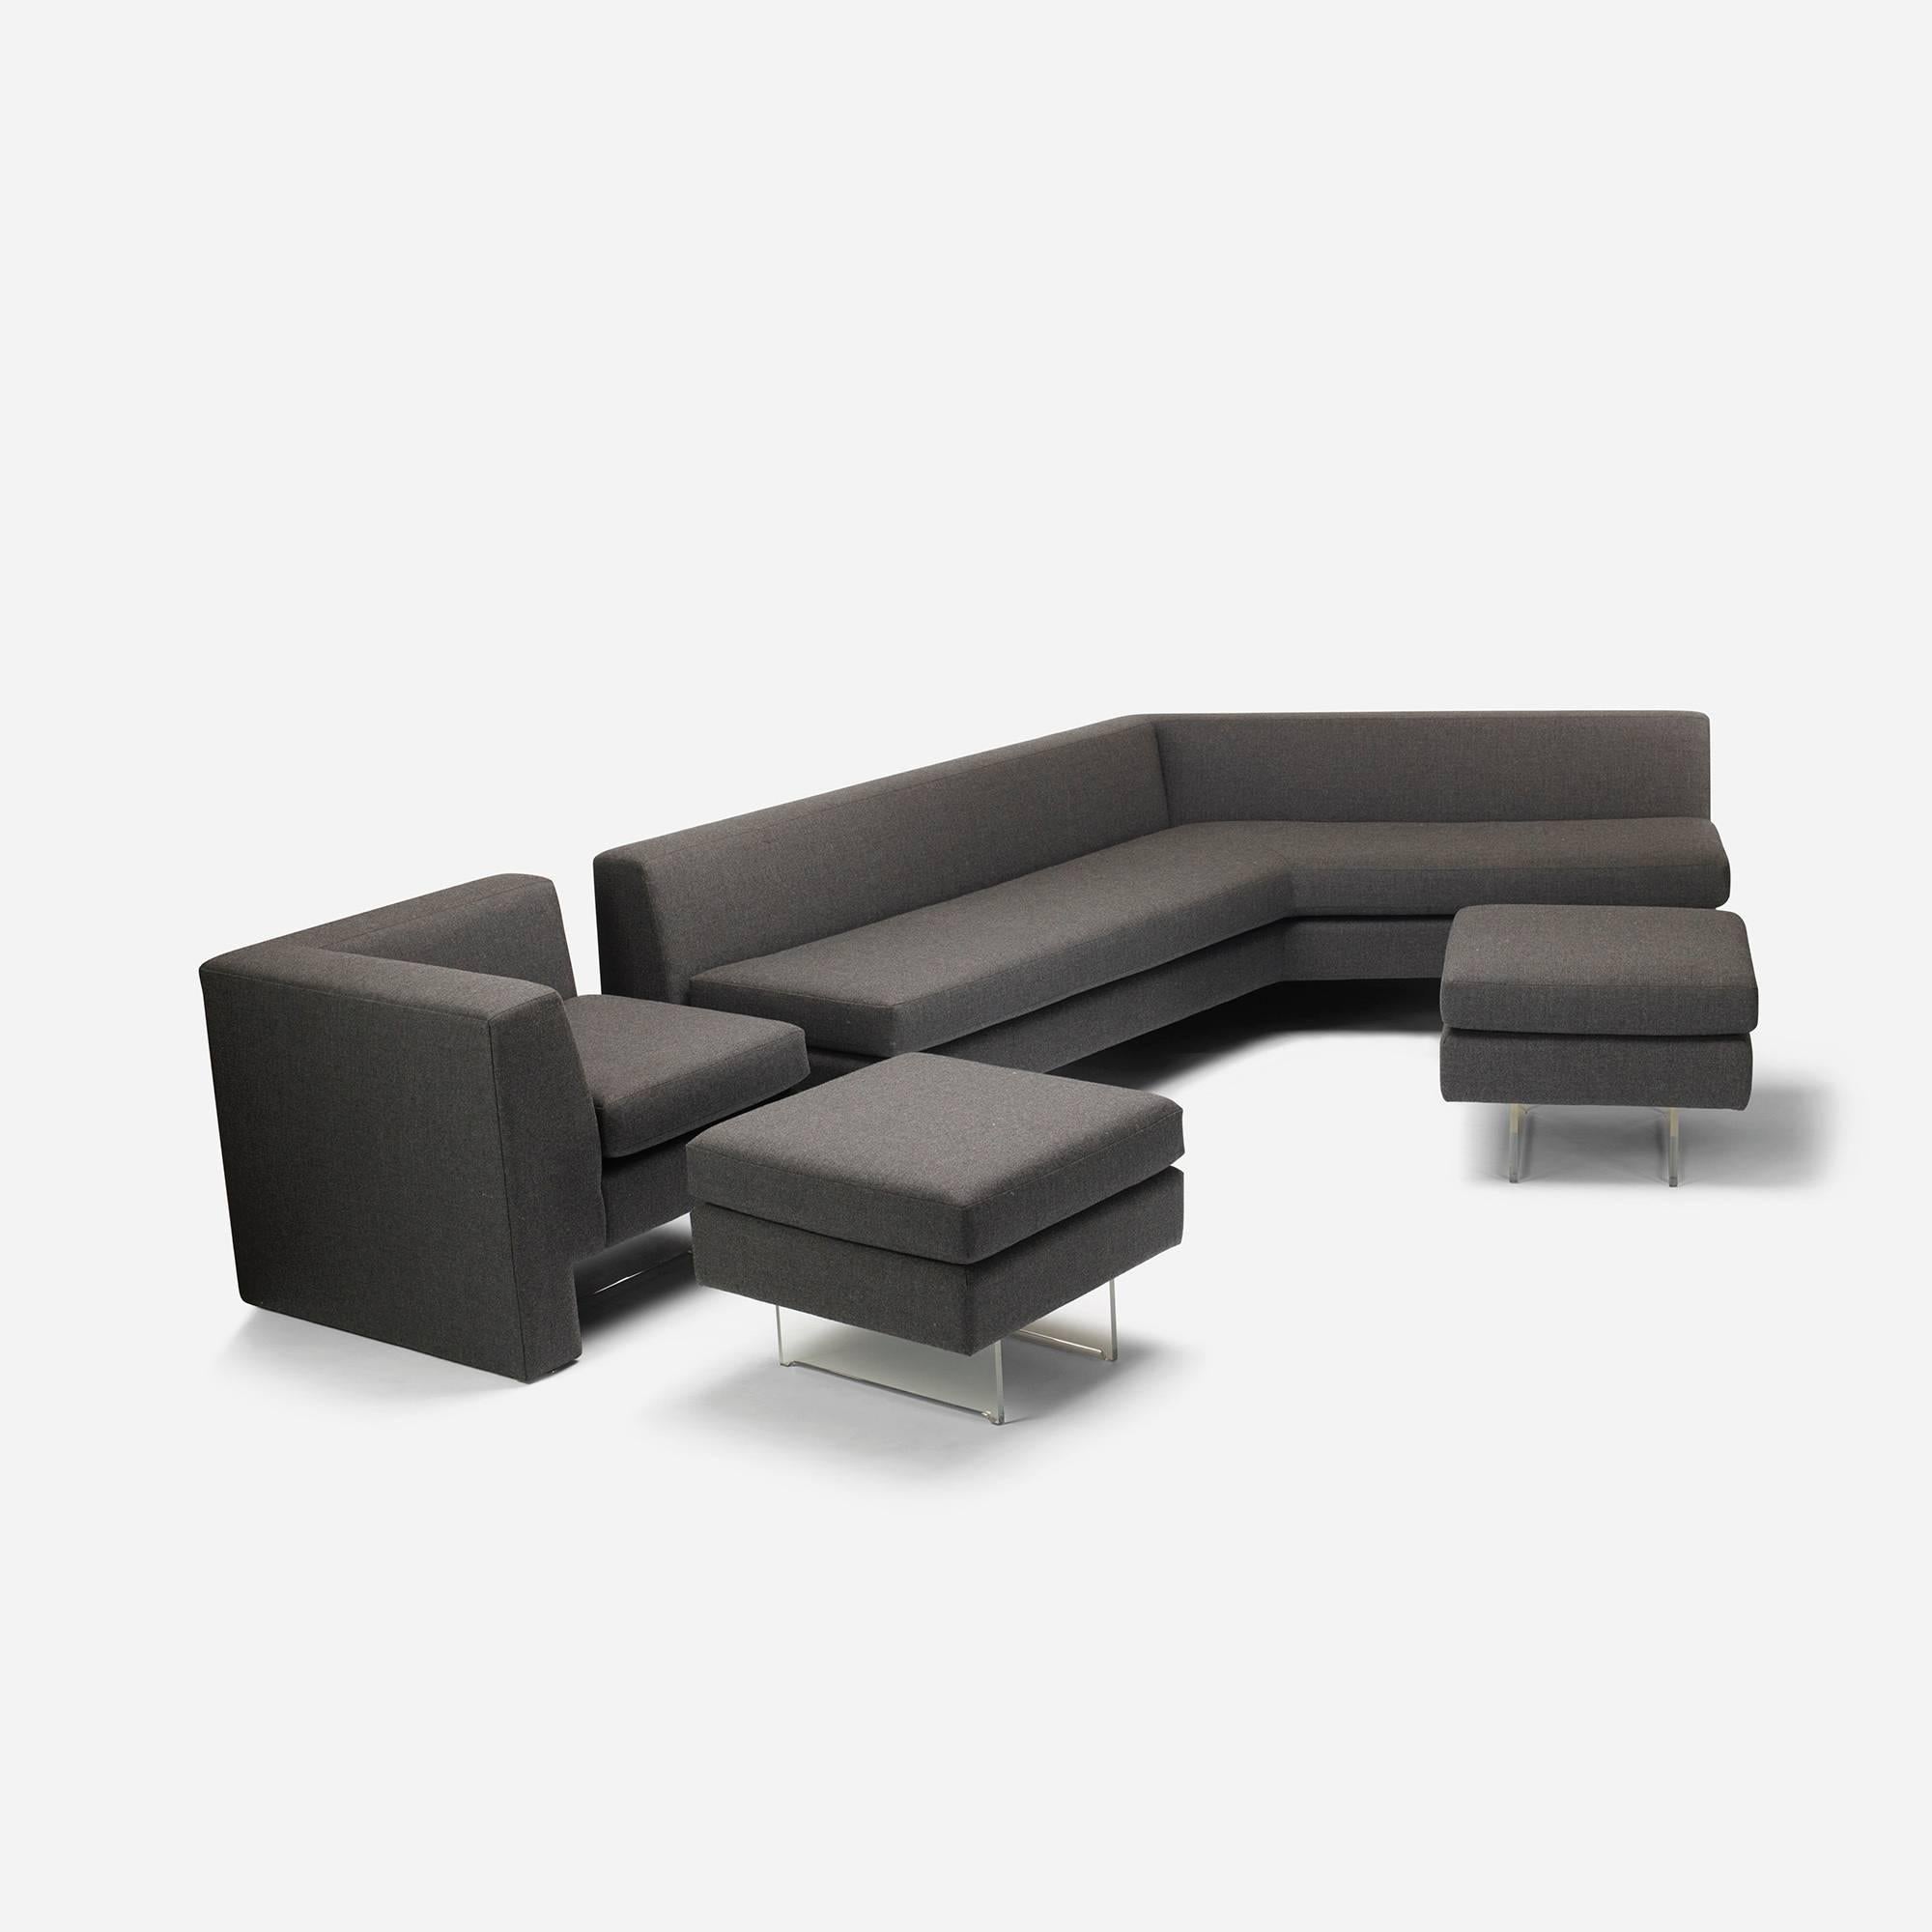 Sectional is comprised of four components; one sofa, one corner unit and two ottomans.